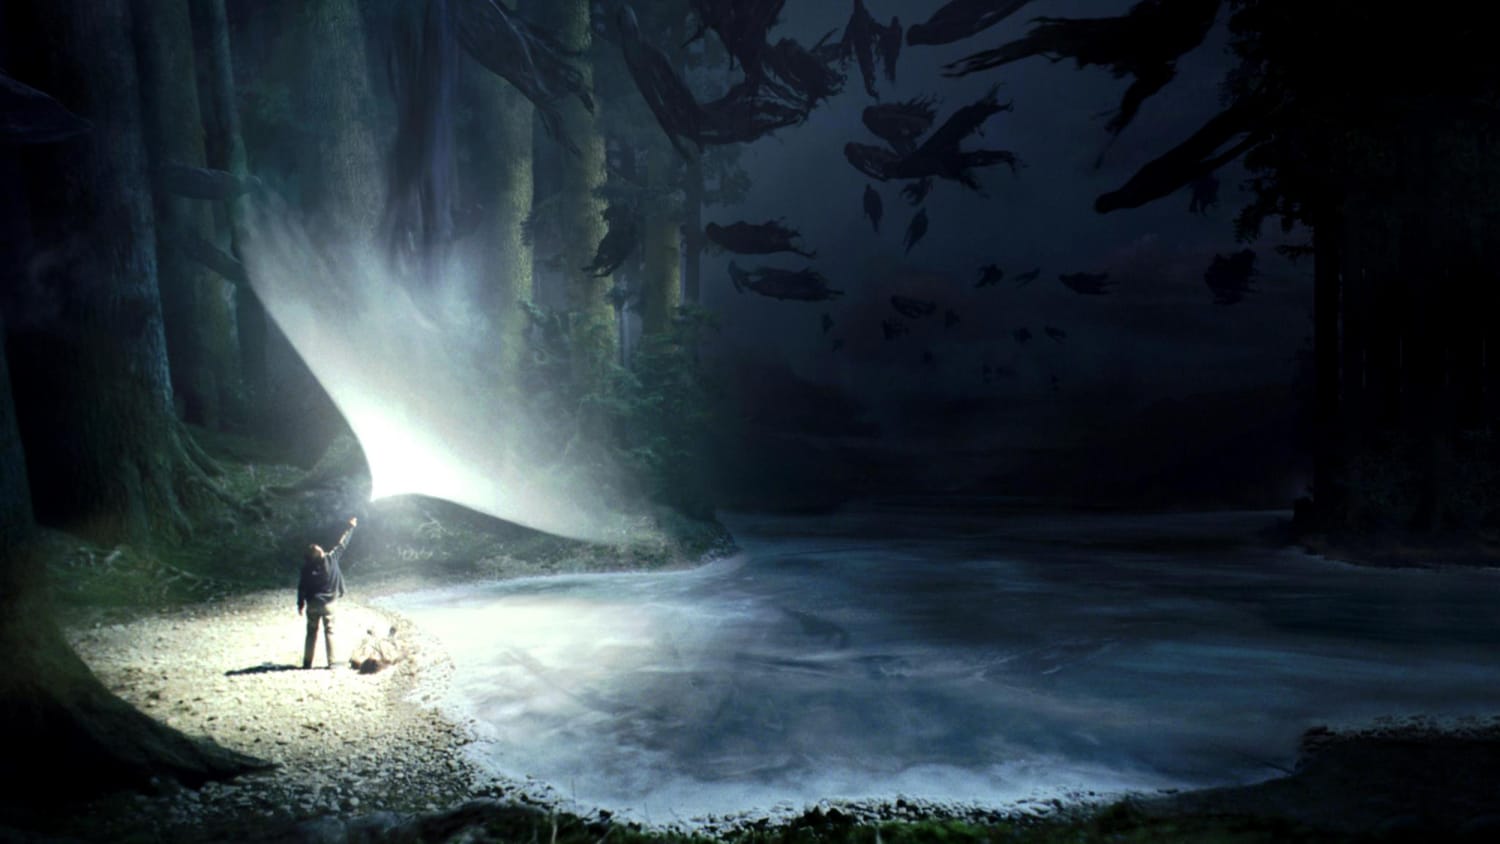 Expecto Patronum! 'Harry Potter' fans can now discover